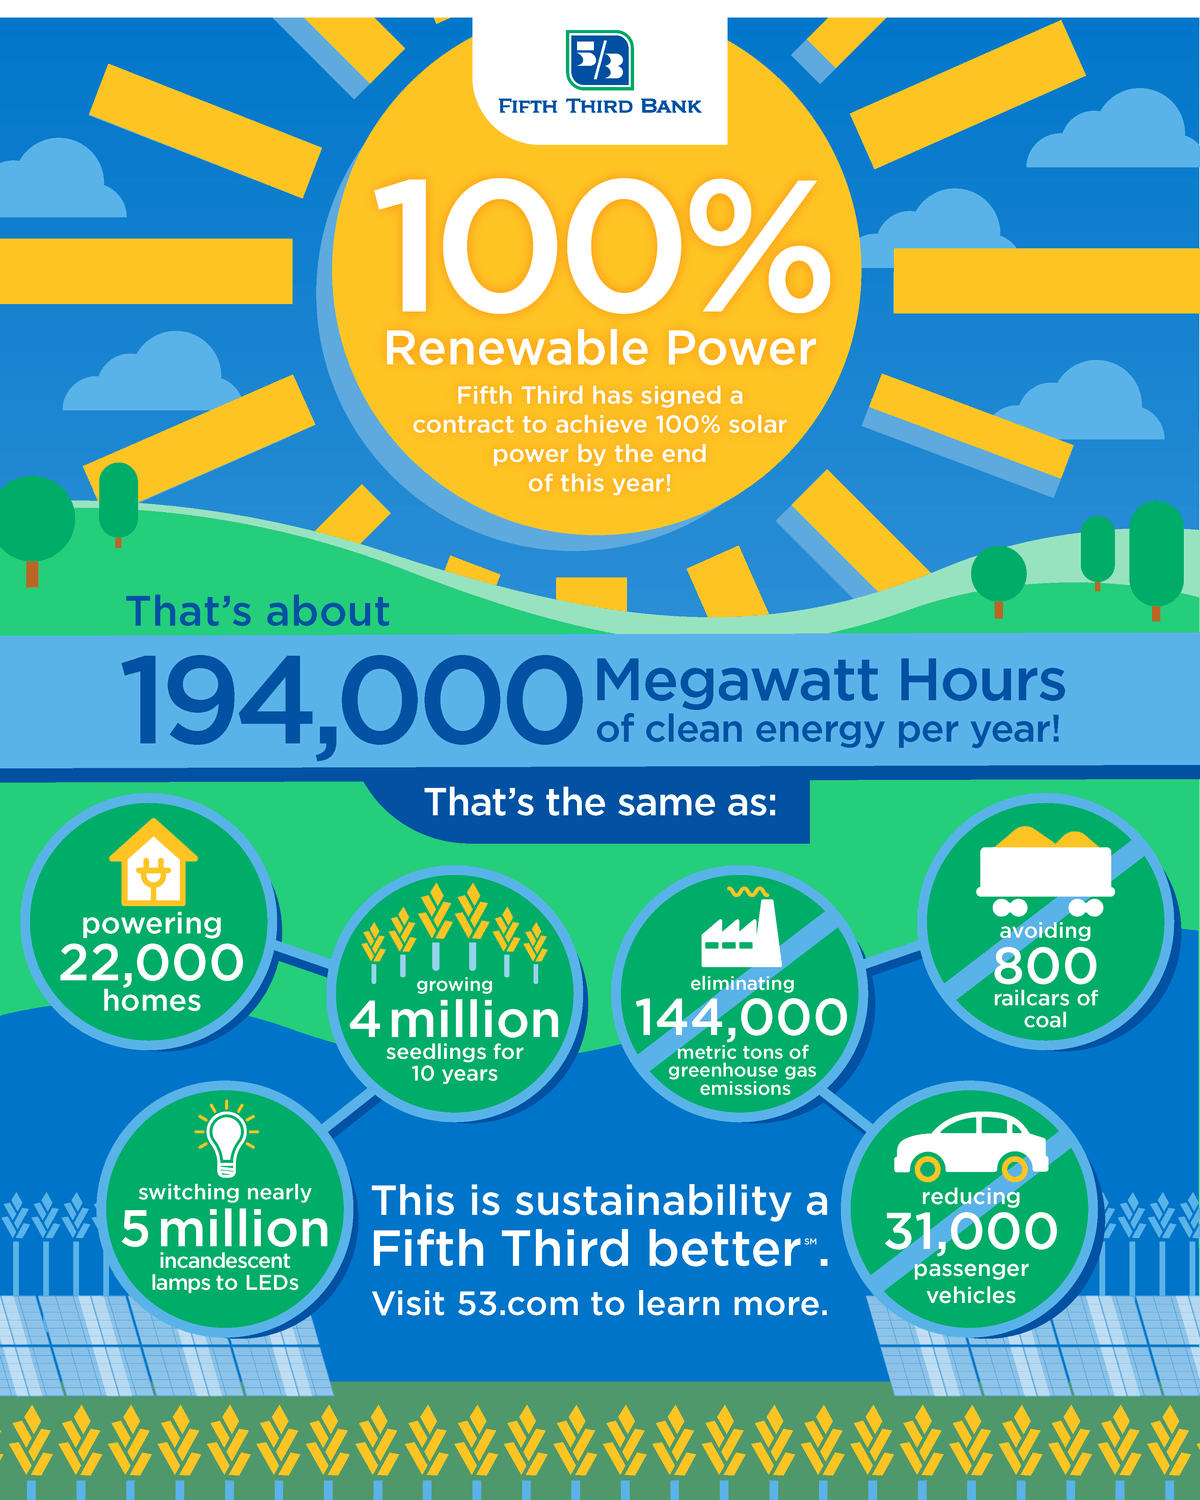 Fifth Third Bank Logo - Fifth Third Bank Commits & Succeeds In Going 100% Renewable With ...